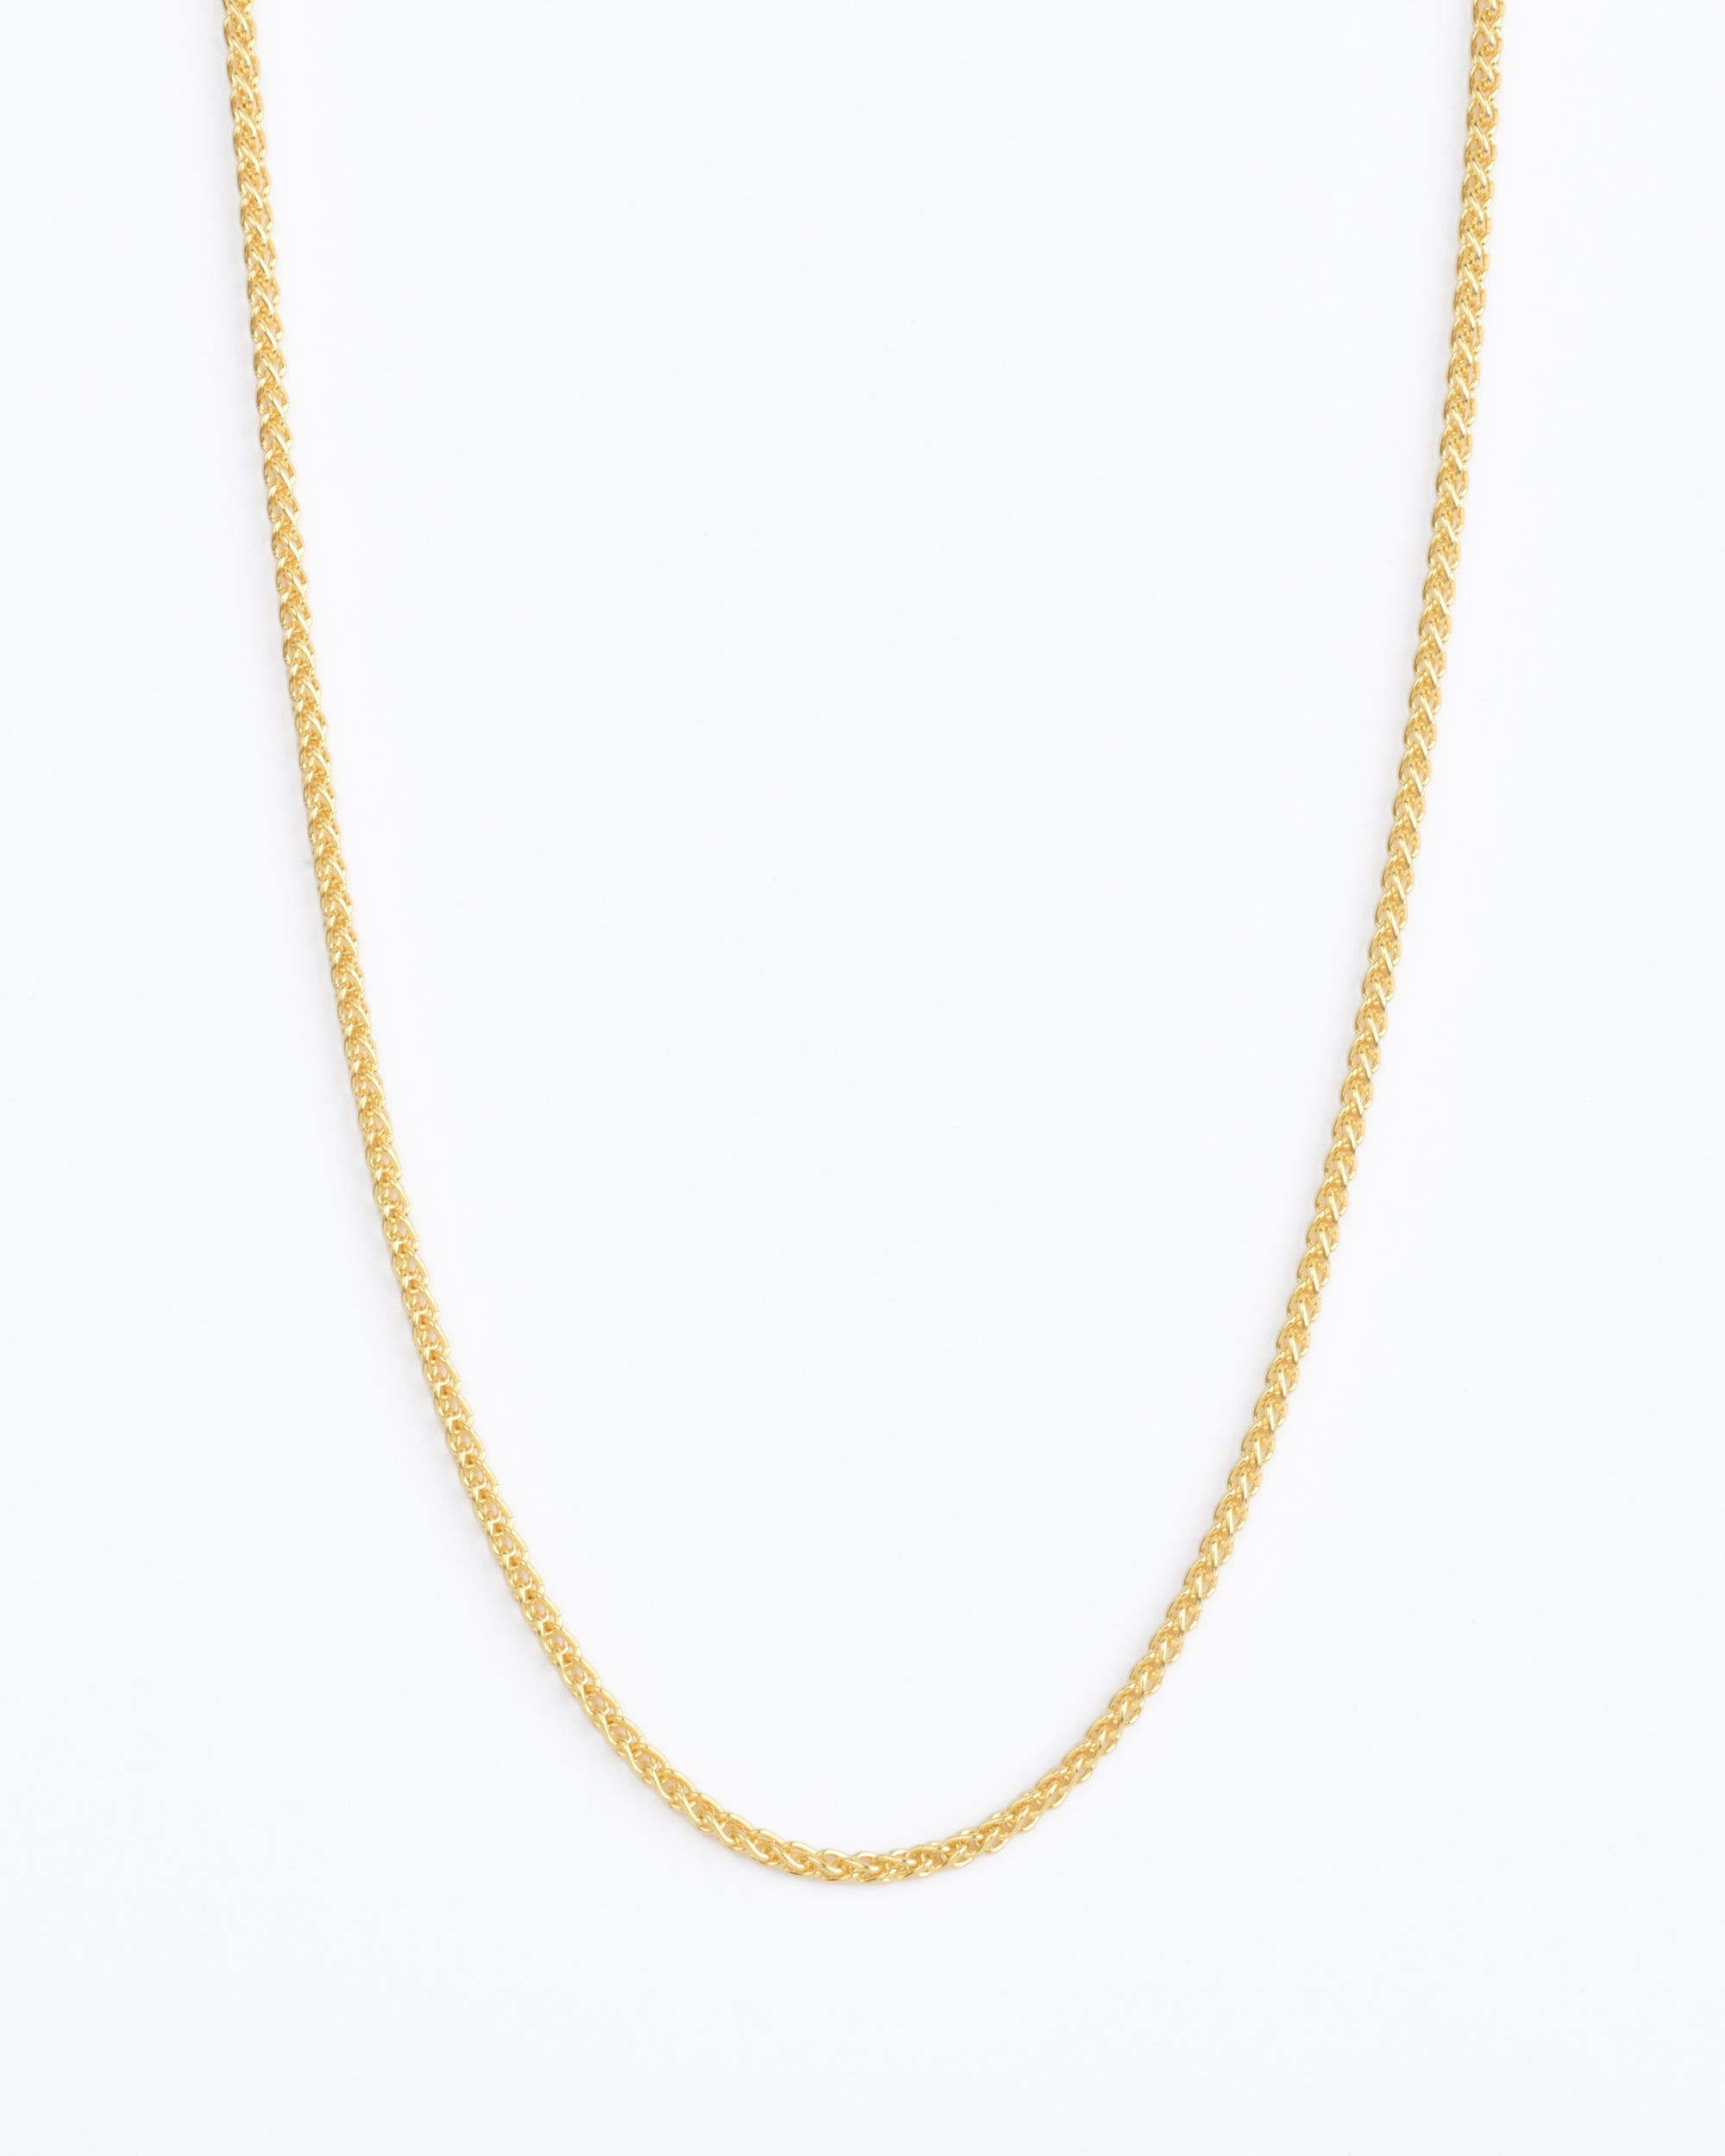 Atlas Necklace by Sincerely Chain Co. 14 karat gold wheat chain robust and well made